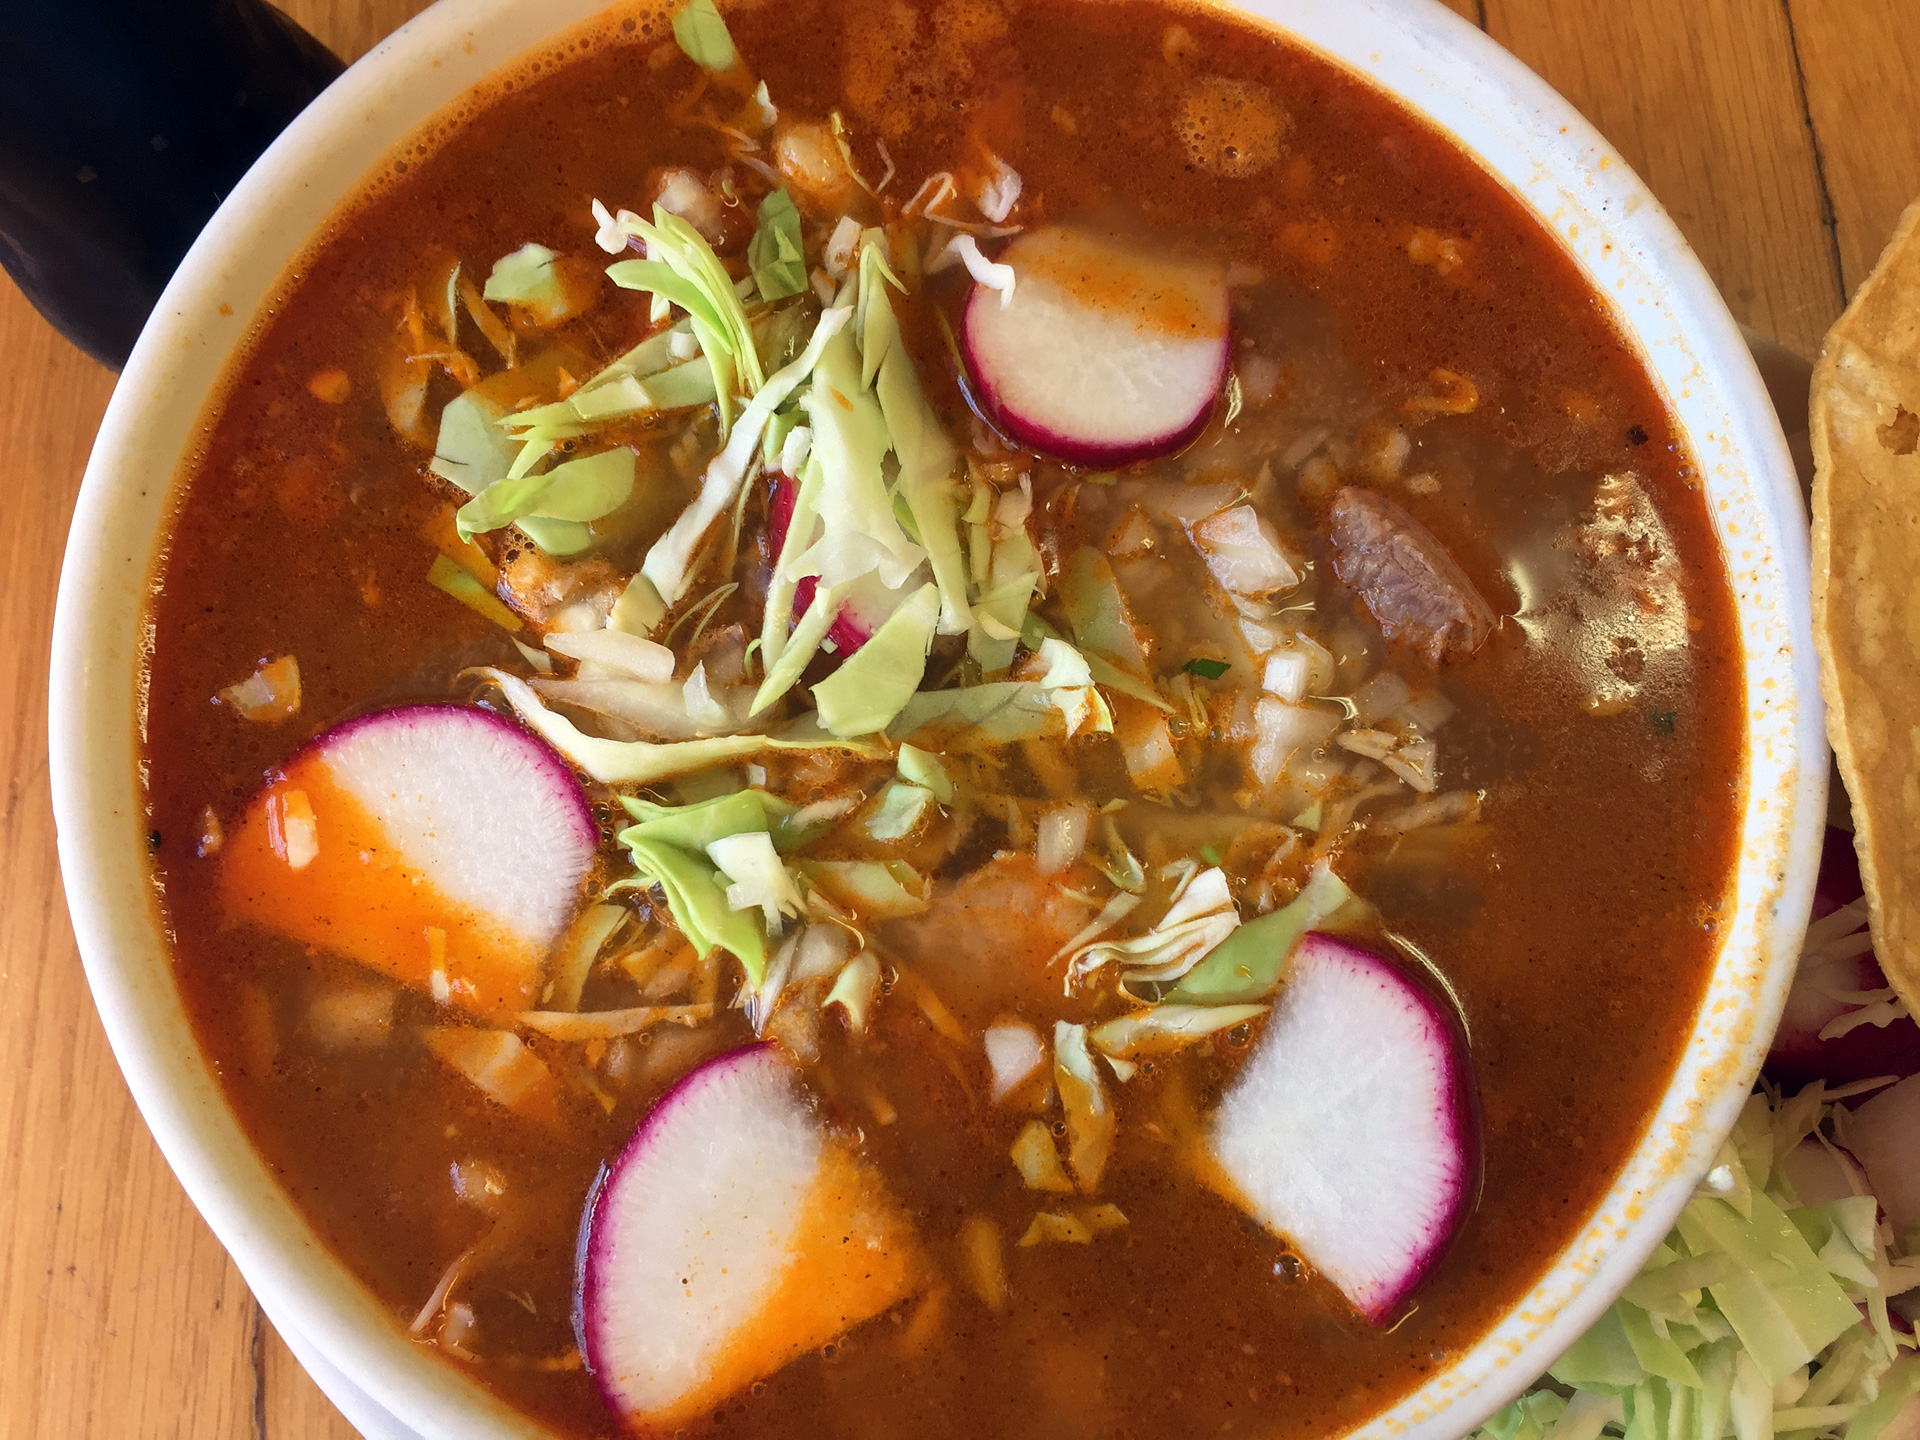 Perfectly balanced red pozole at Portumex in Richmond.